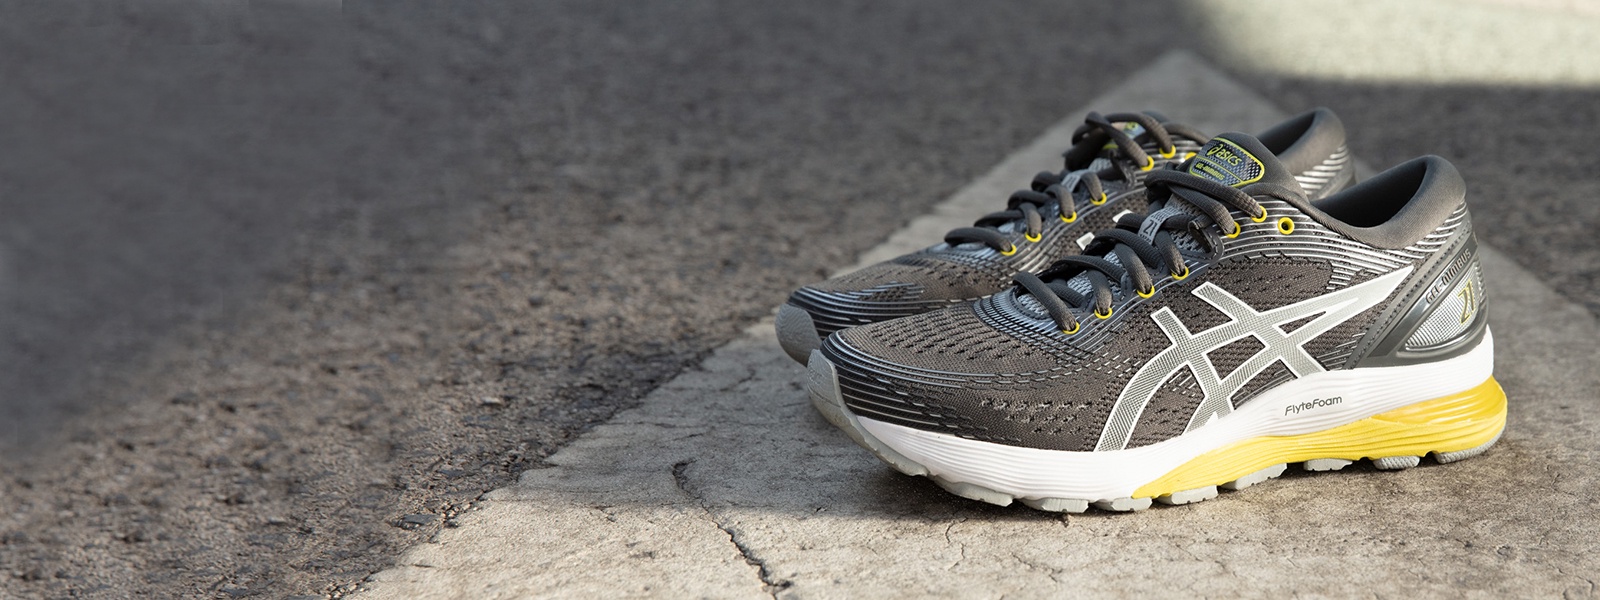 Grey and yellow running shoes sitting on a street